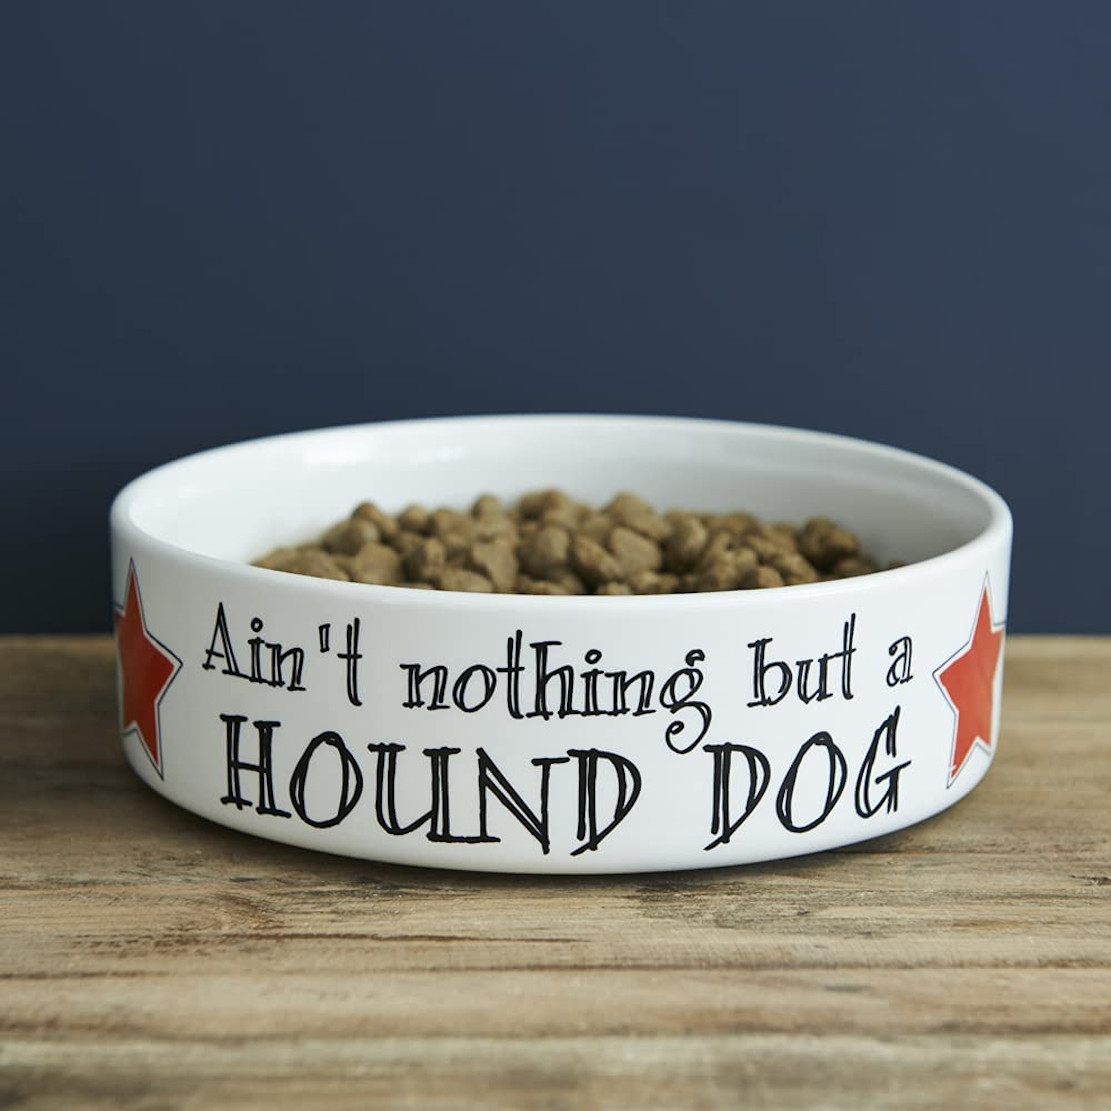 Sweet William Aint Nothing But A Hound Dog - Small Dog Bowl